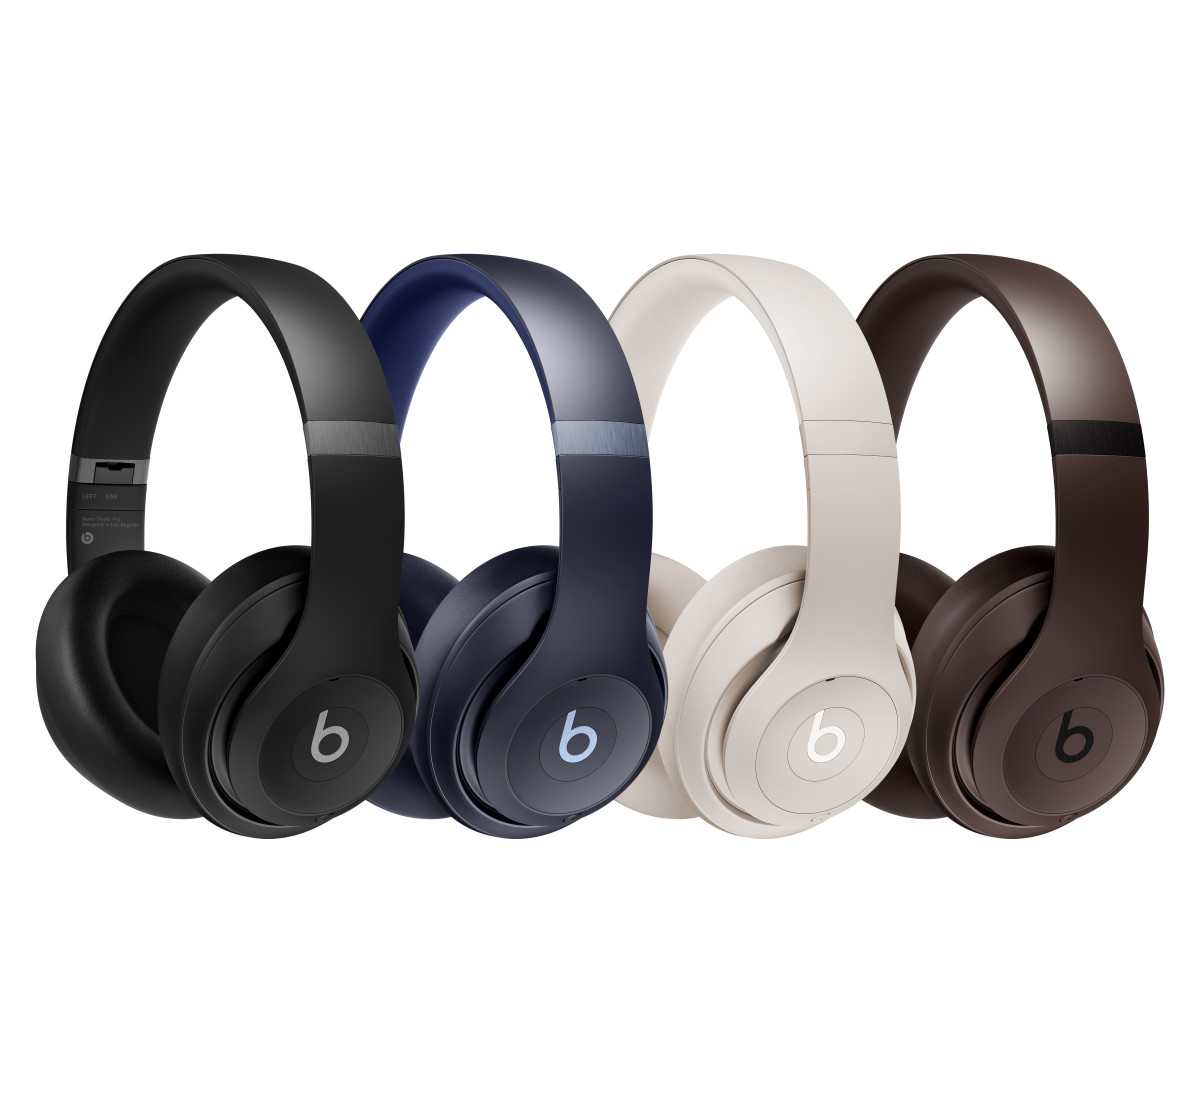 The new Beats Studio Pro arrives with upgraded sound and monochromatic